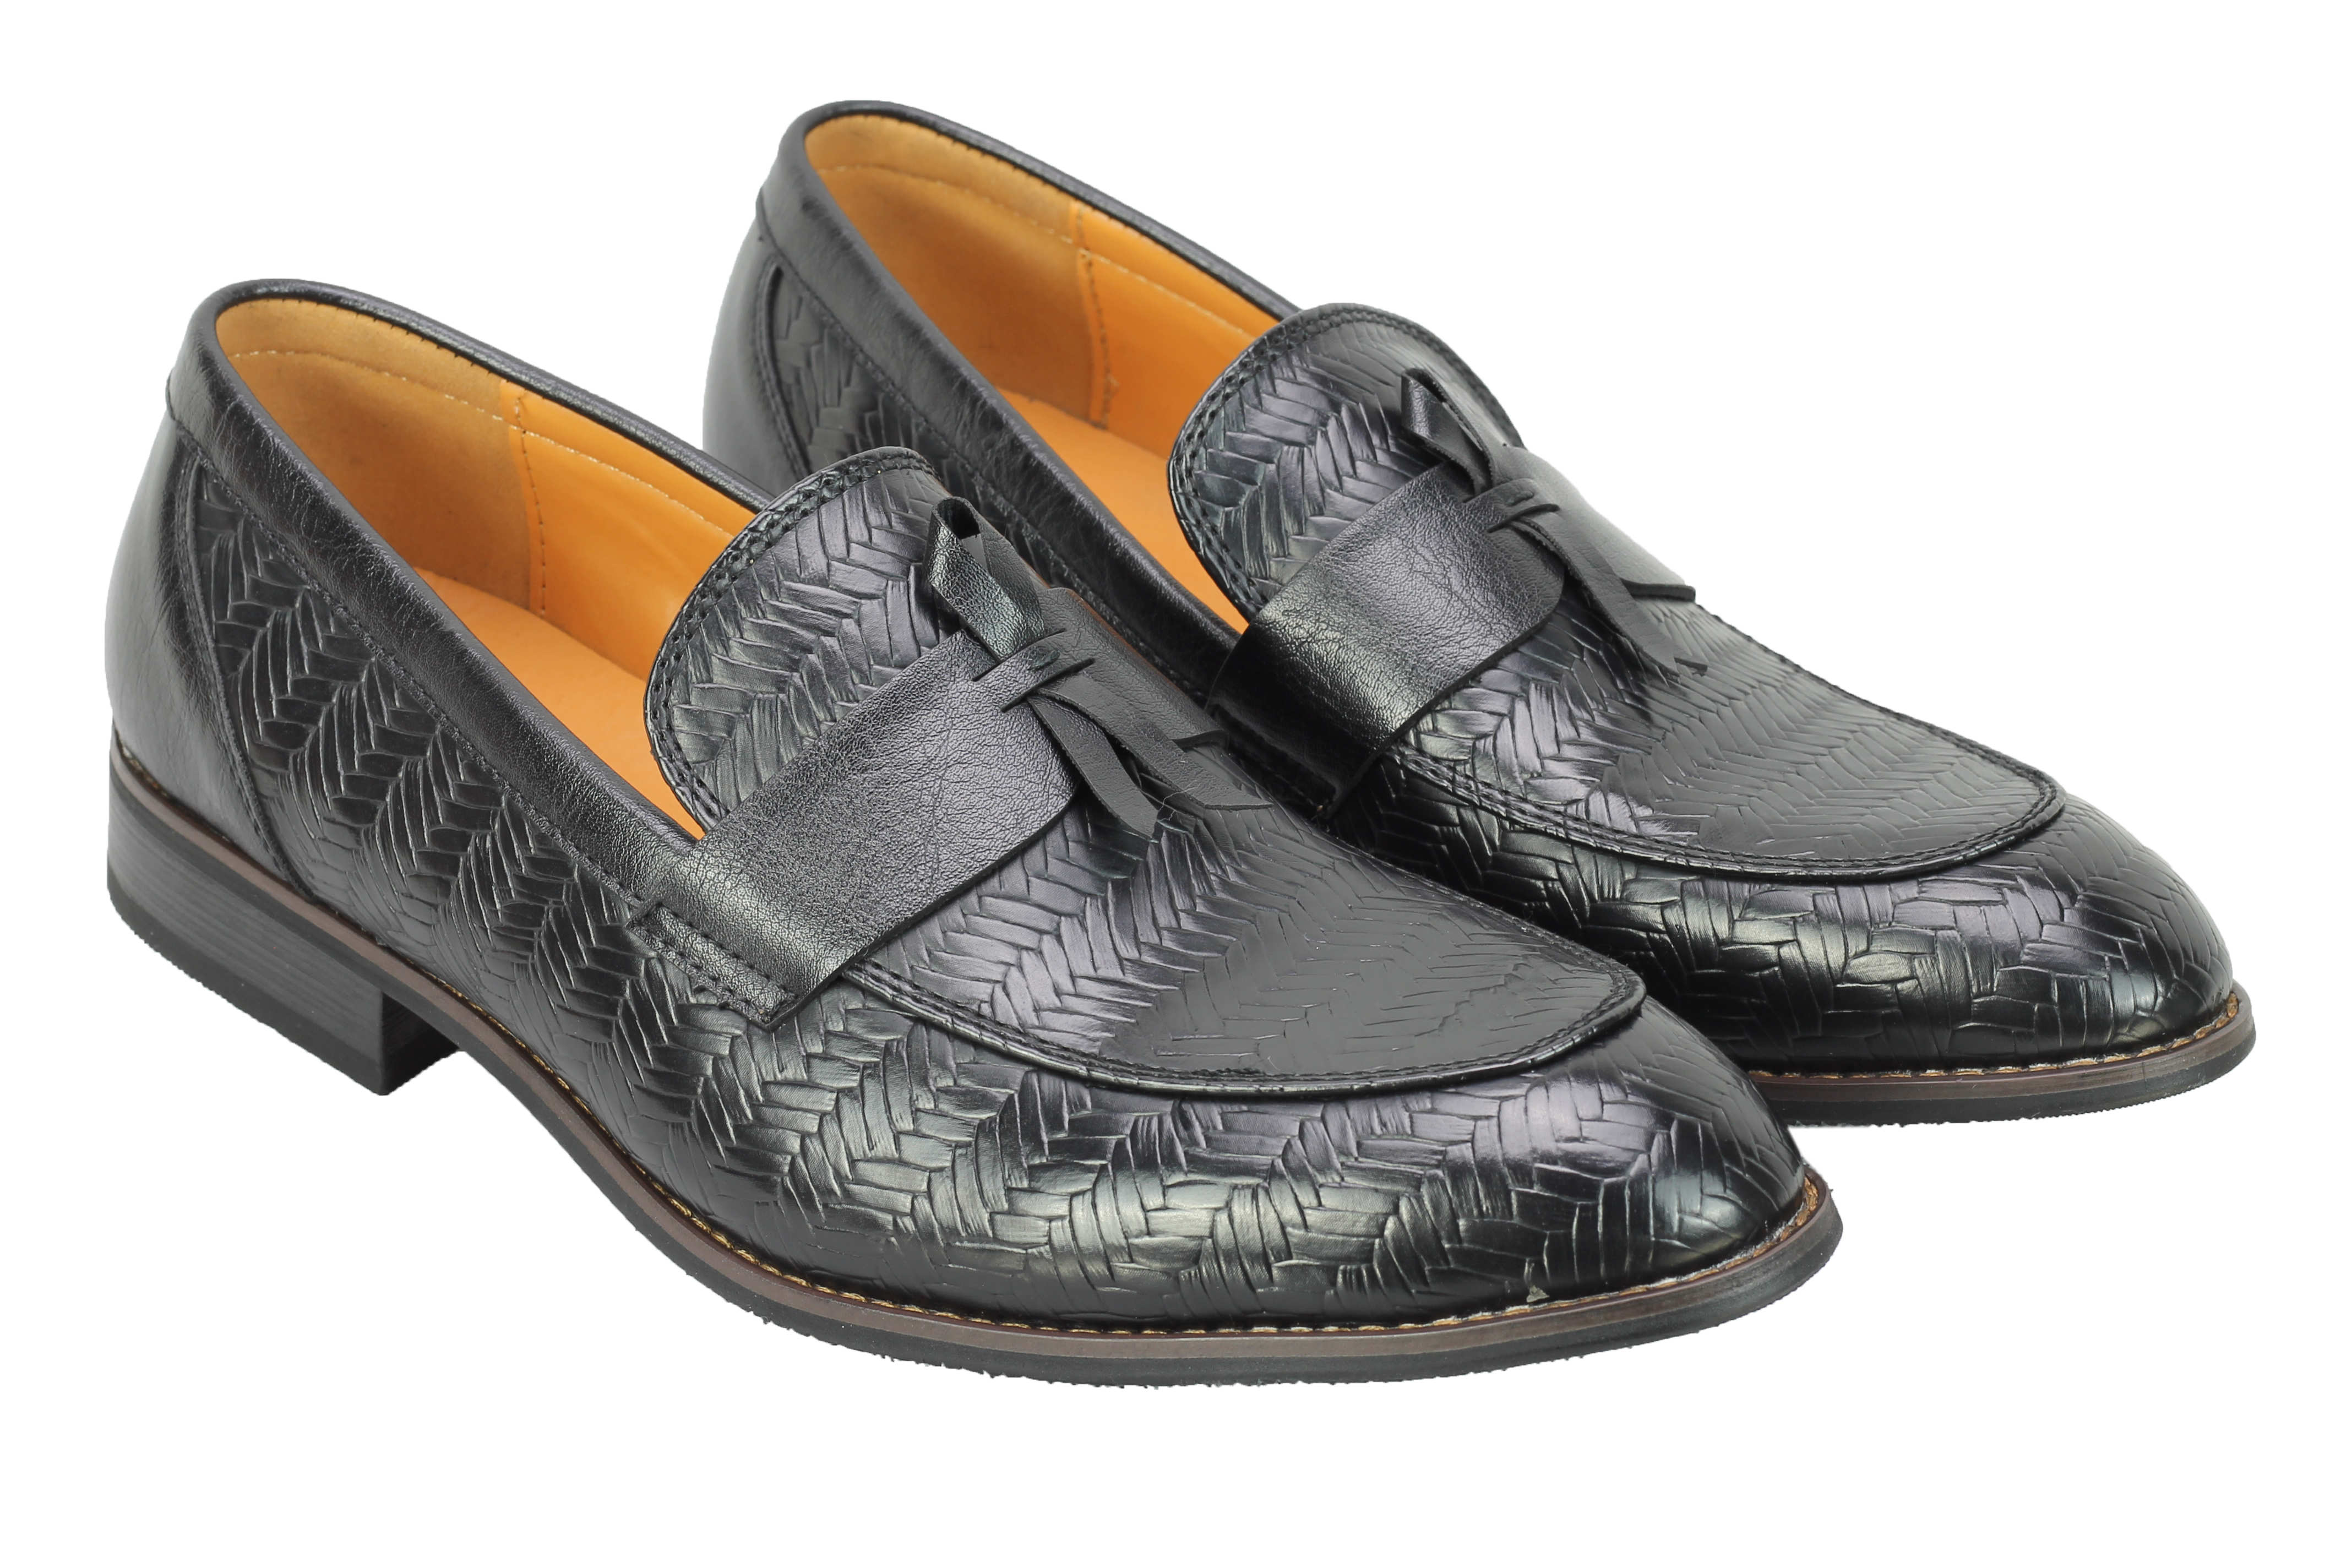 Mens Leather Lined Slip on Loafers Woven Patterned Smart Casual Retro